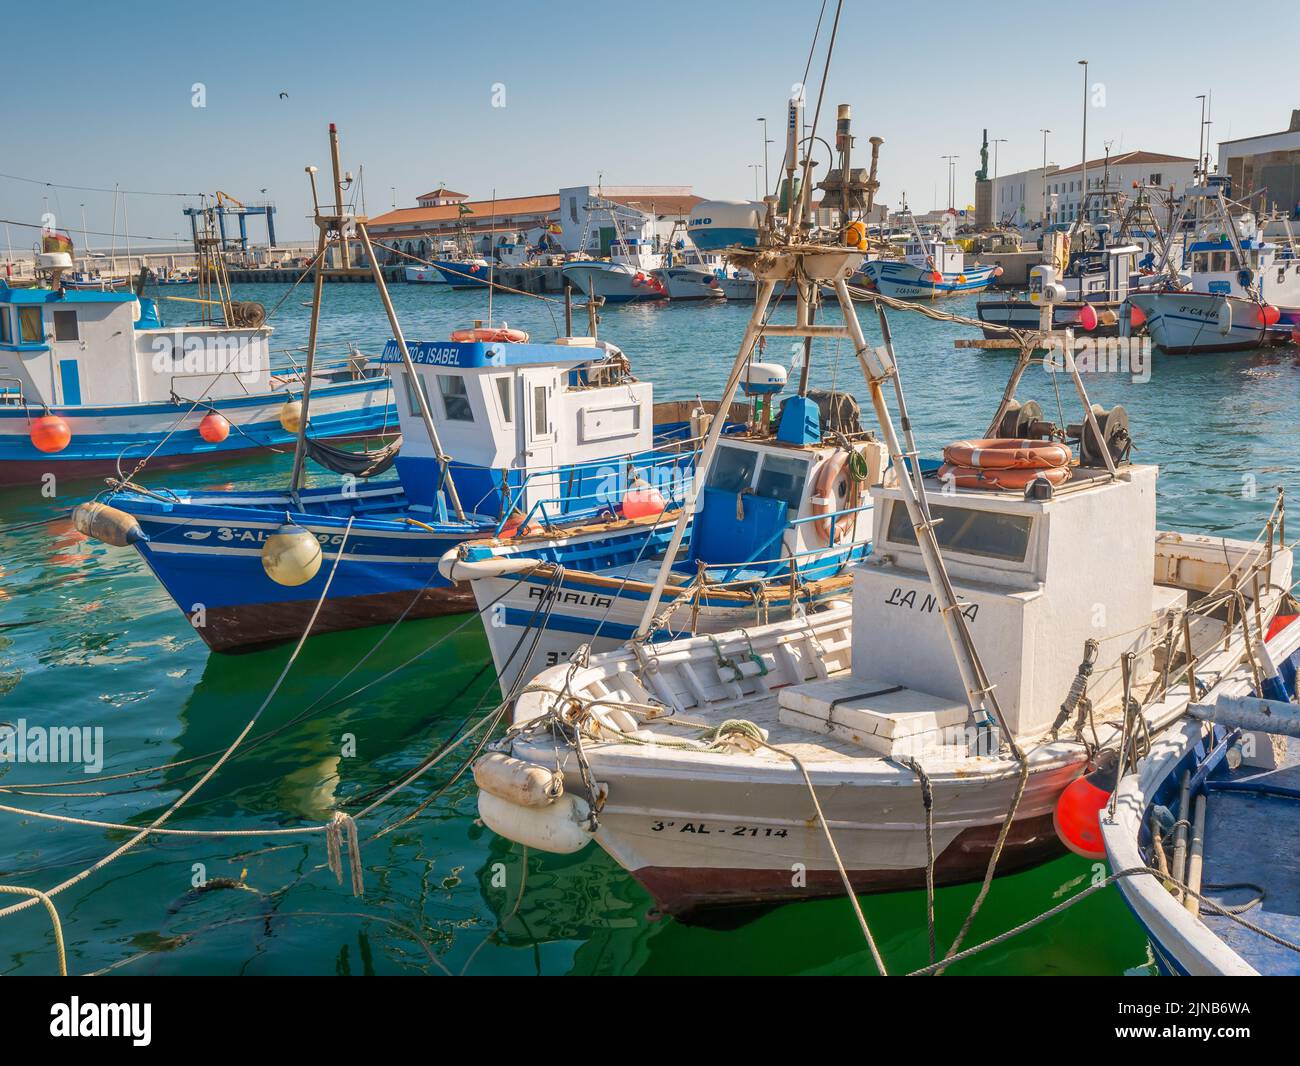 Fishing Boats In The Fishing Port Of Tarifa, Andalusia, Spain, Europe Stock Photo